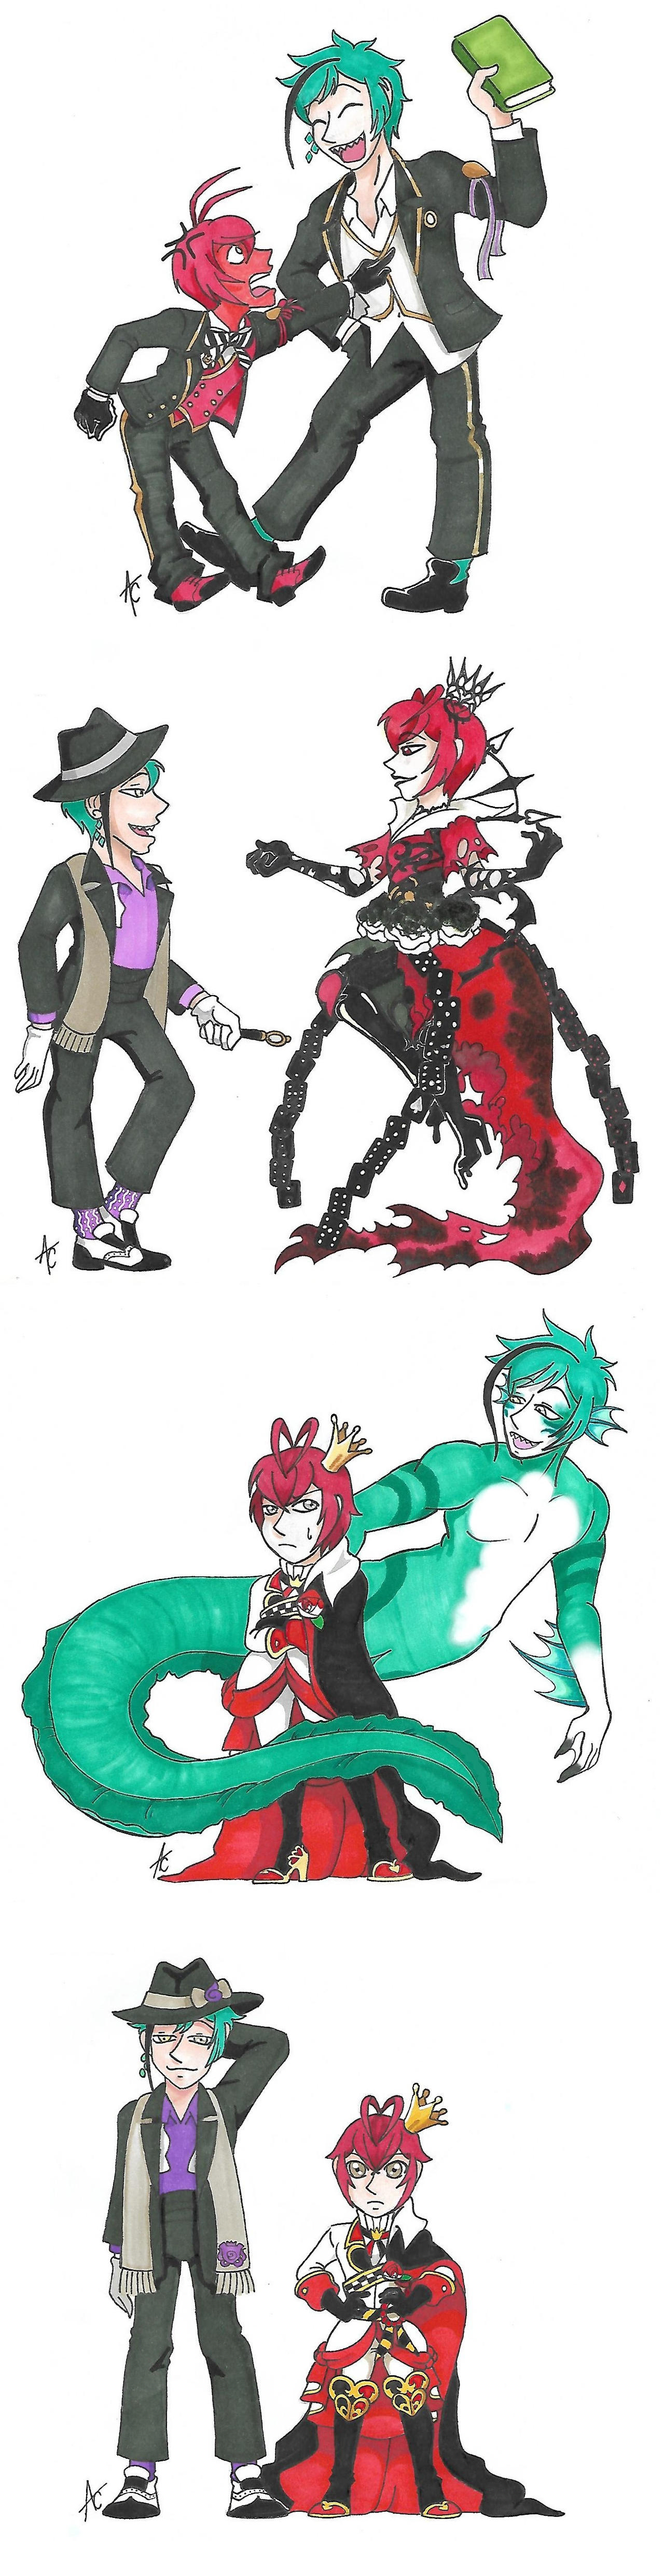 Riddle and Floyd moments by AliceCherie on DeviantArt